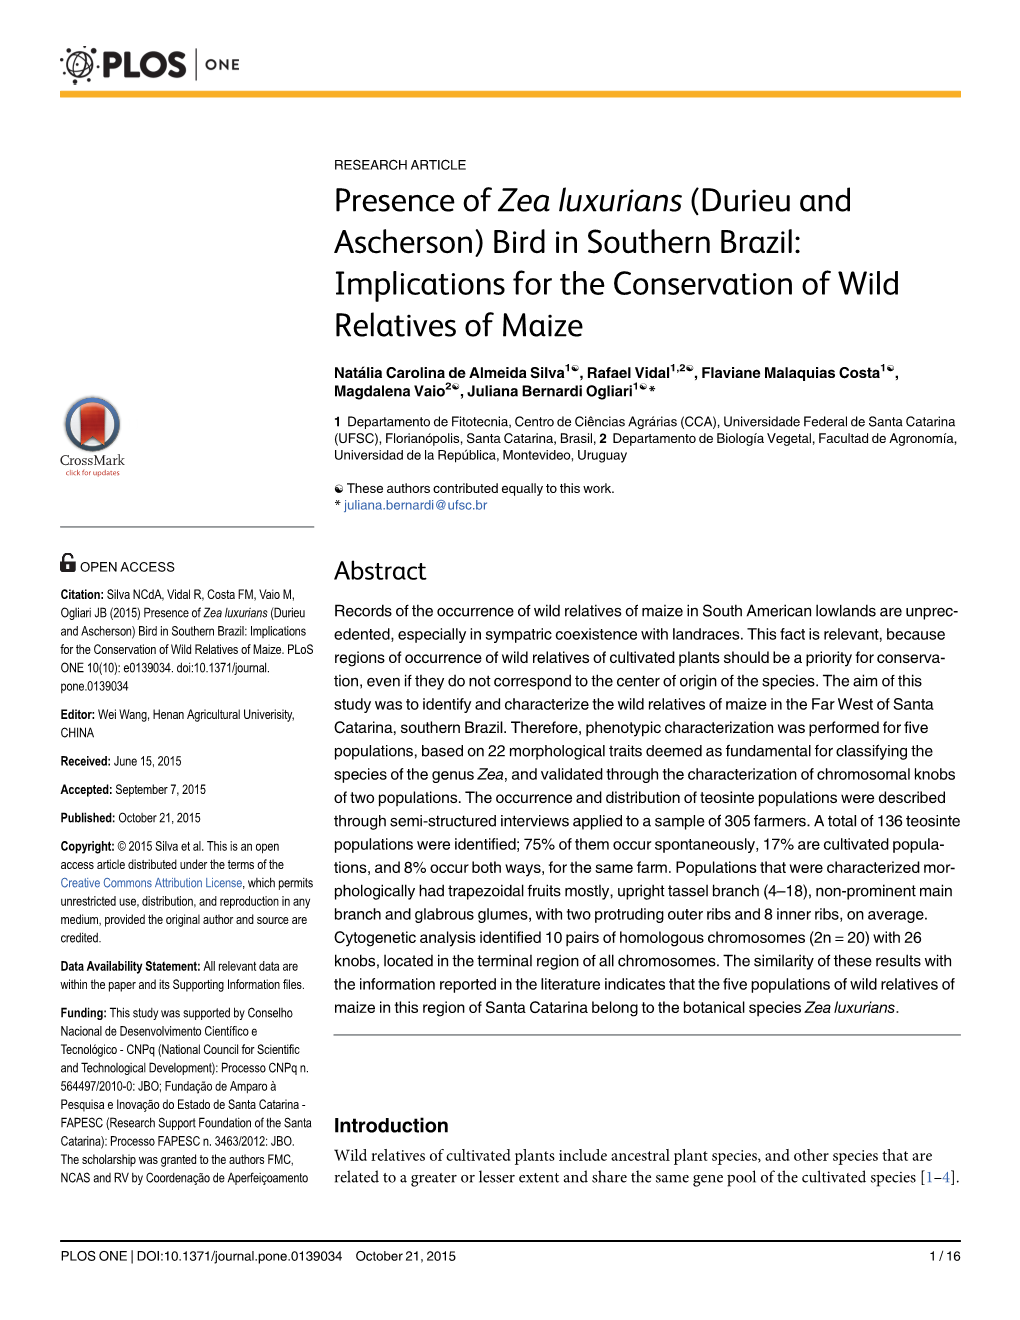 Presence of Zea Luxurians (Durieu and Ascherson) Bird in Southern Brazil: Implications for the Conservation of Wild Relatives of Maize